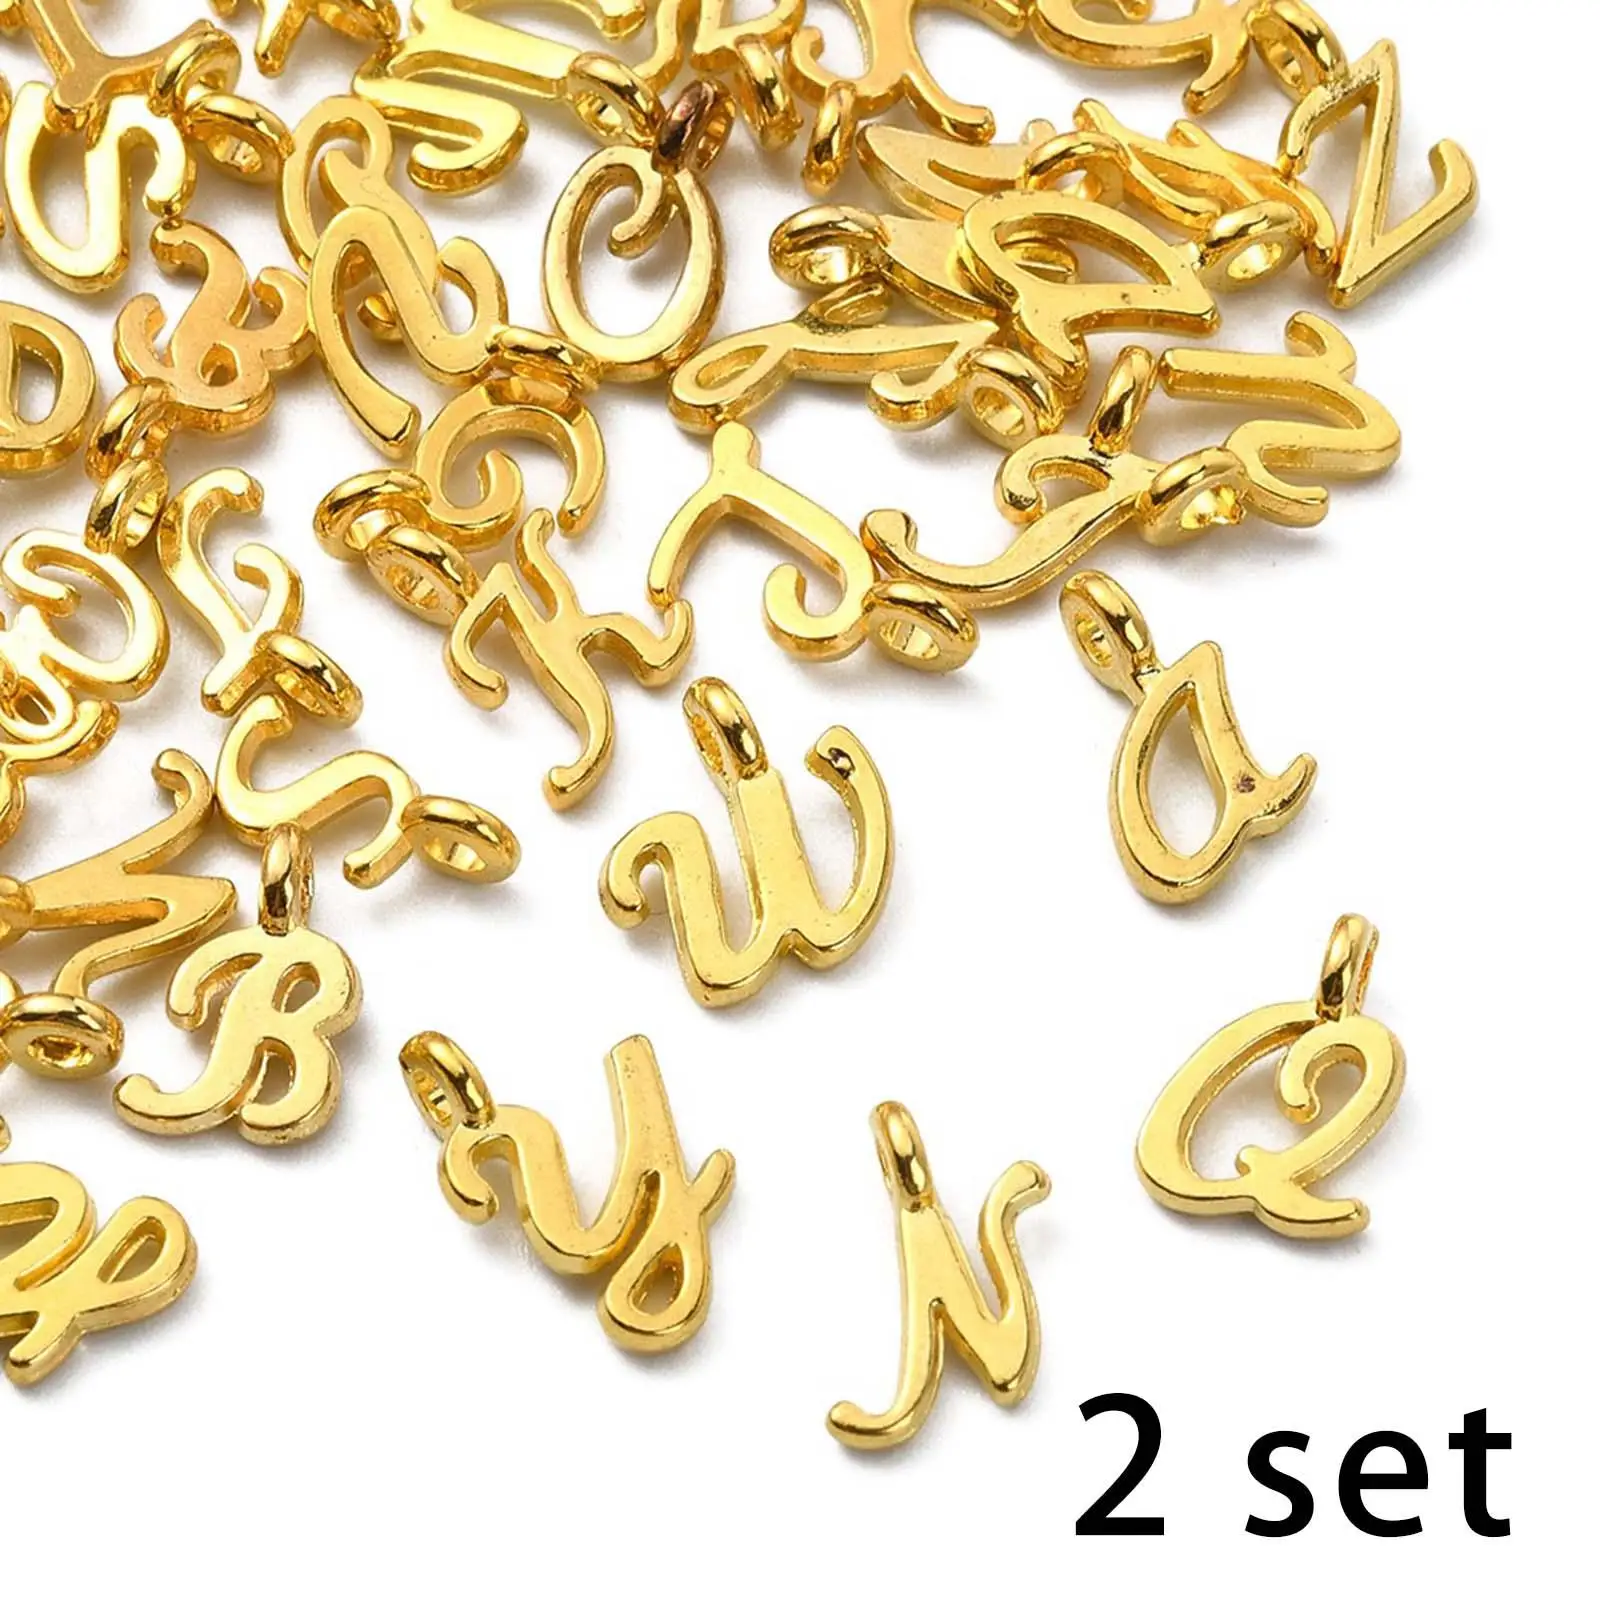 26Pcs Alphabet Pendant Charms A-Z Handmade Letter Charms for Jewelry Making Earring Bracelet Necklace DIY Craft